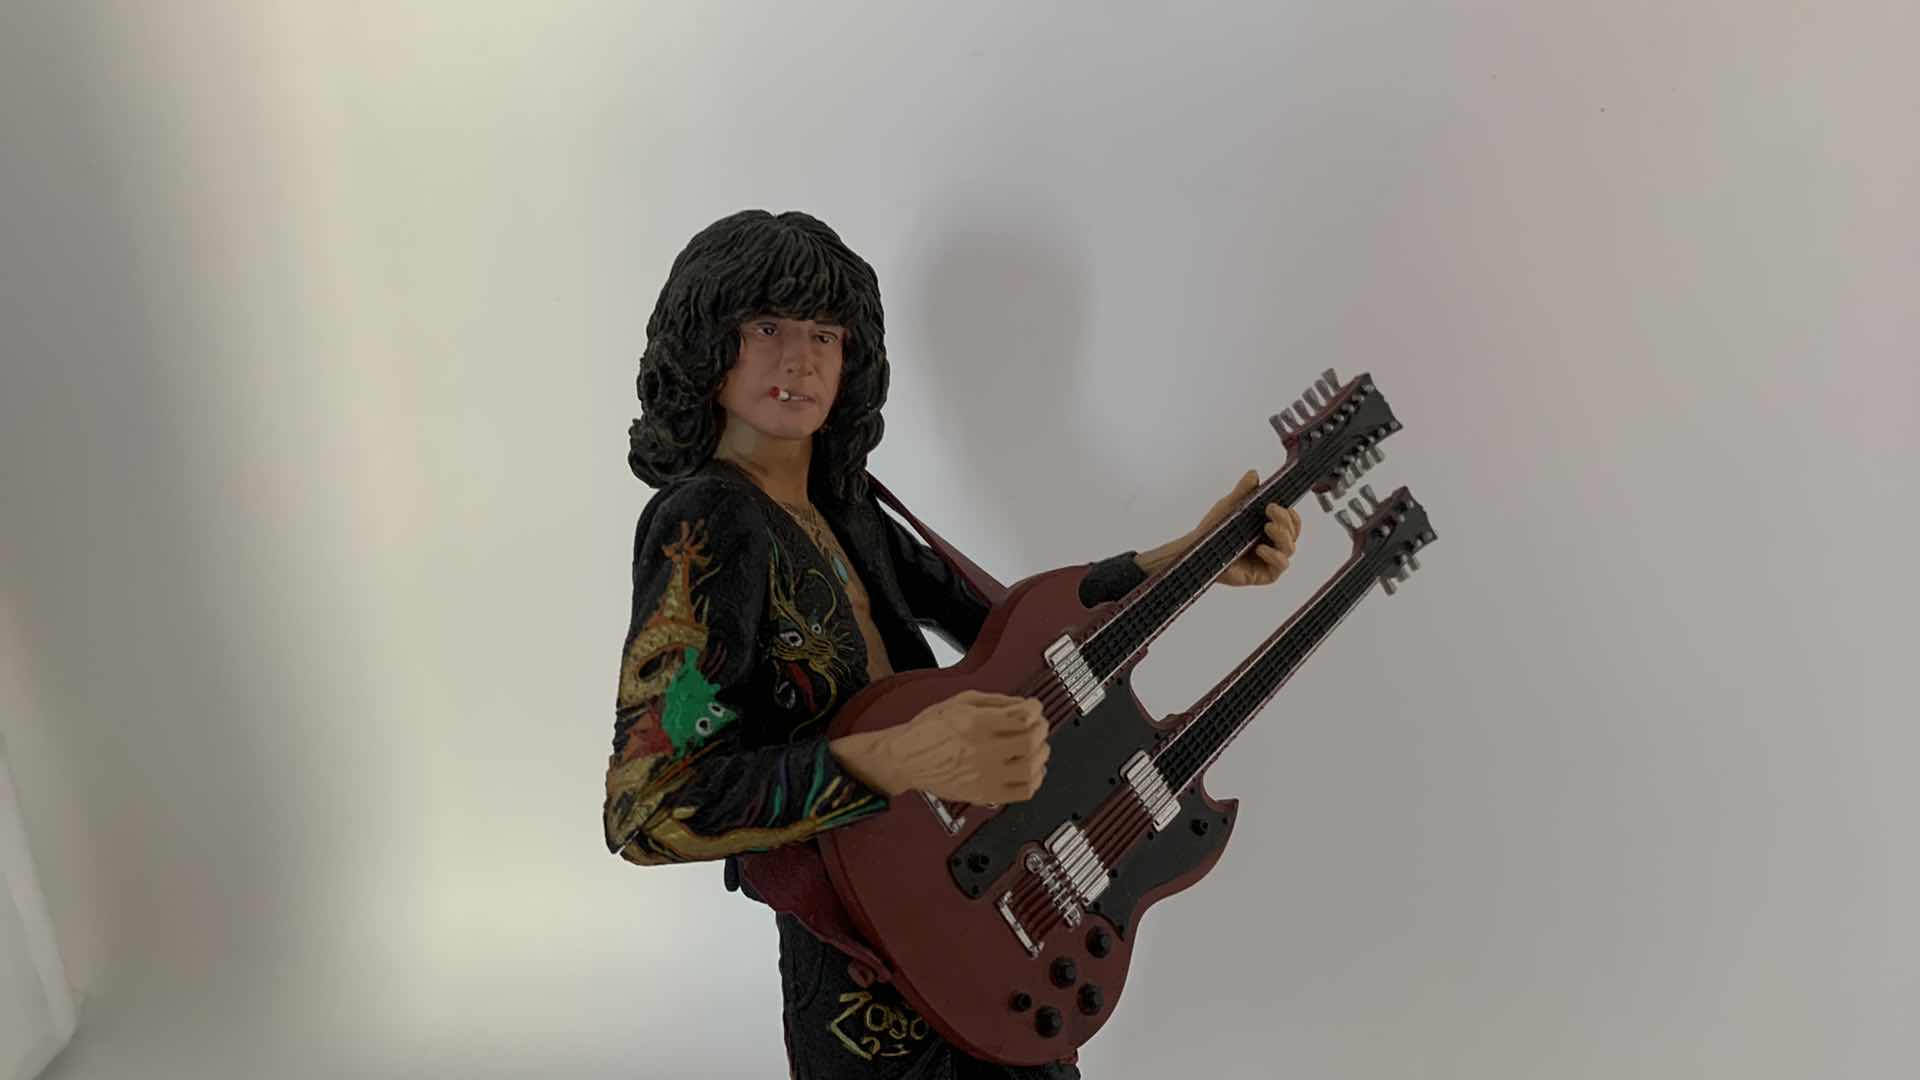 Photo 2 of 2006 NECA TOYS JIMMY PAGE ACTION FIGURE.